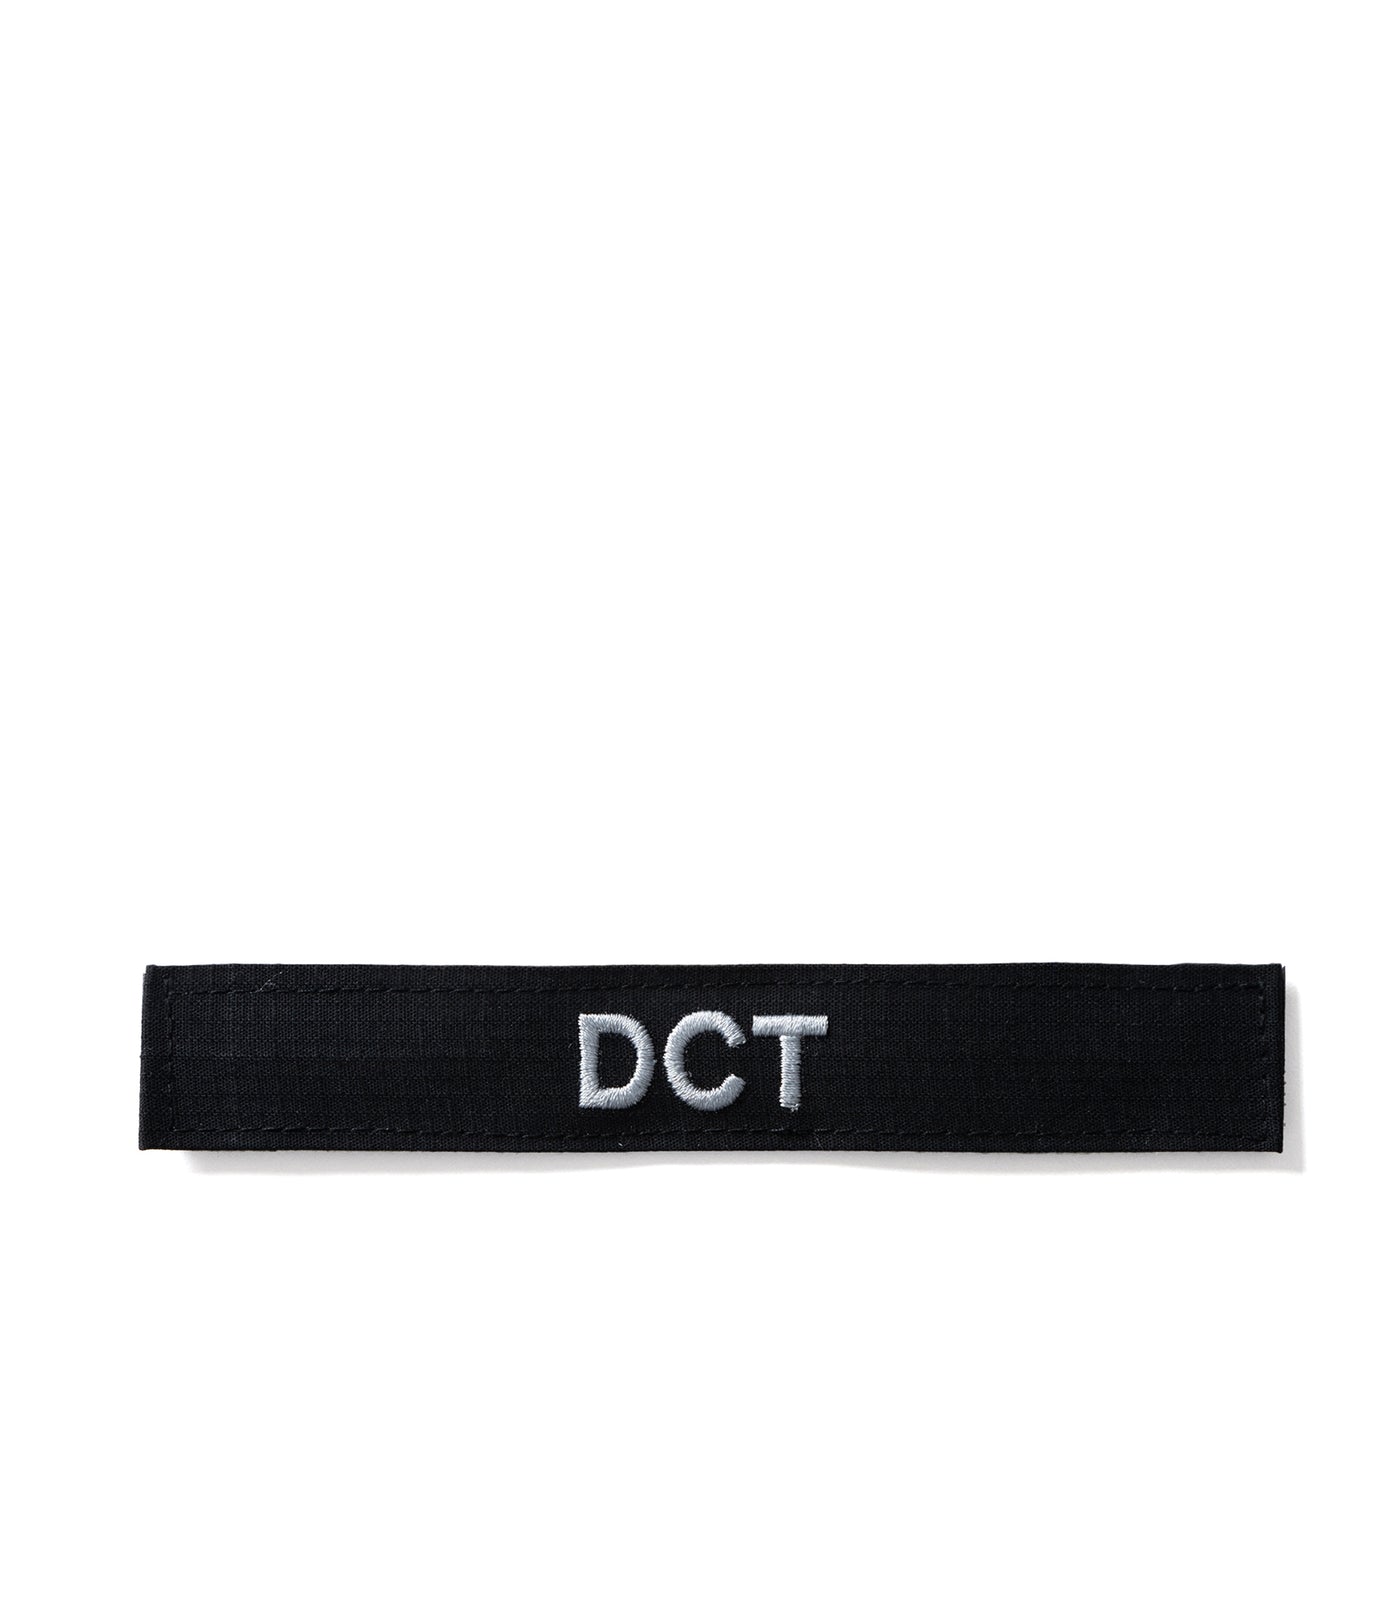 1X6 Name Tape (DCT)